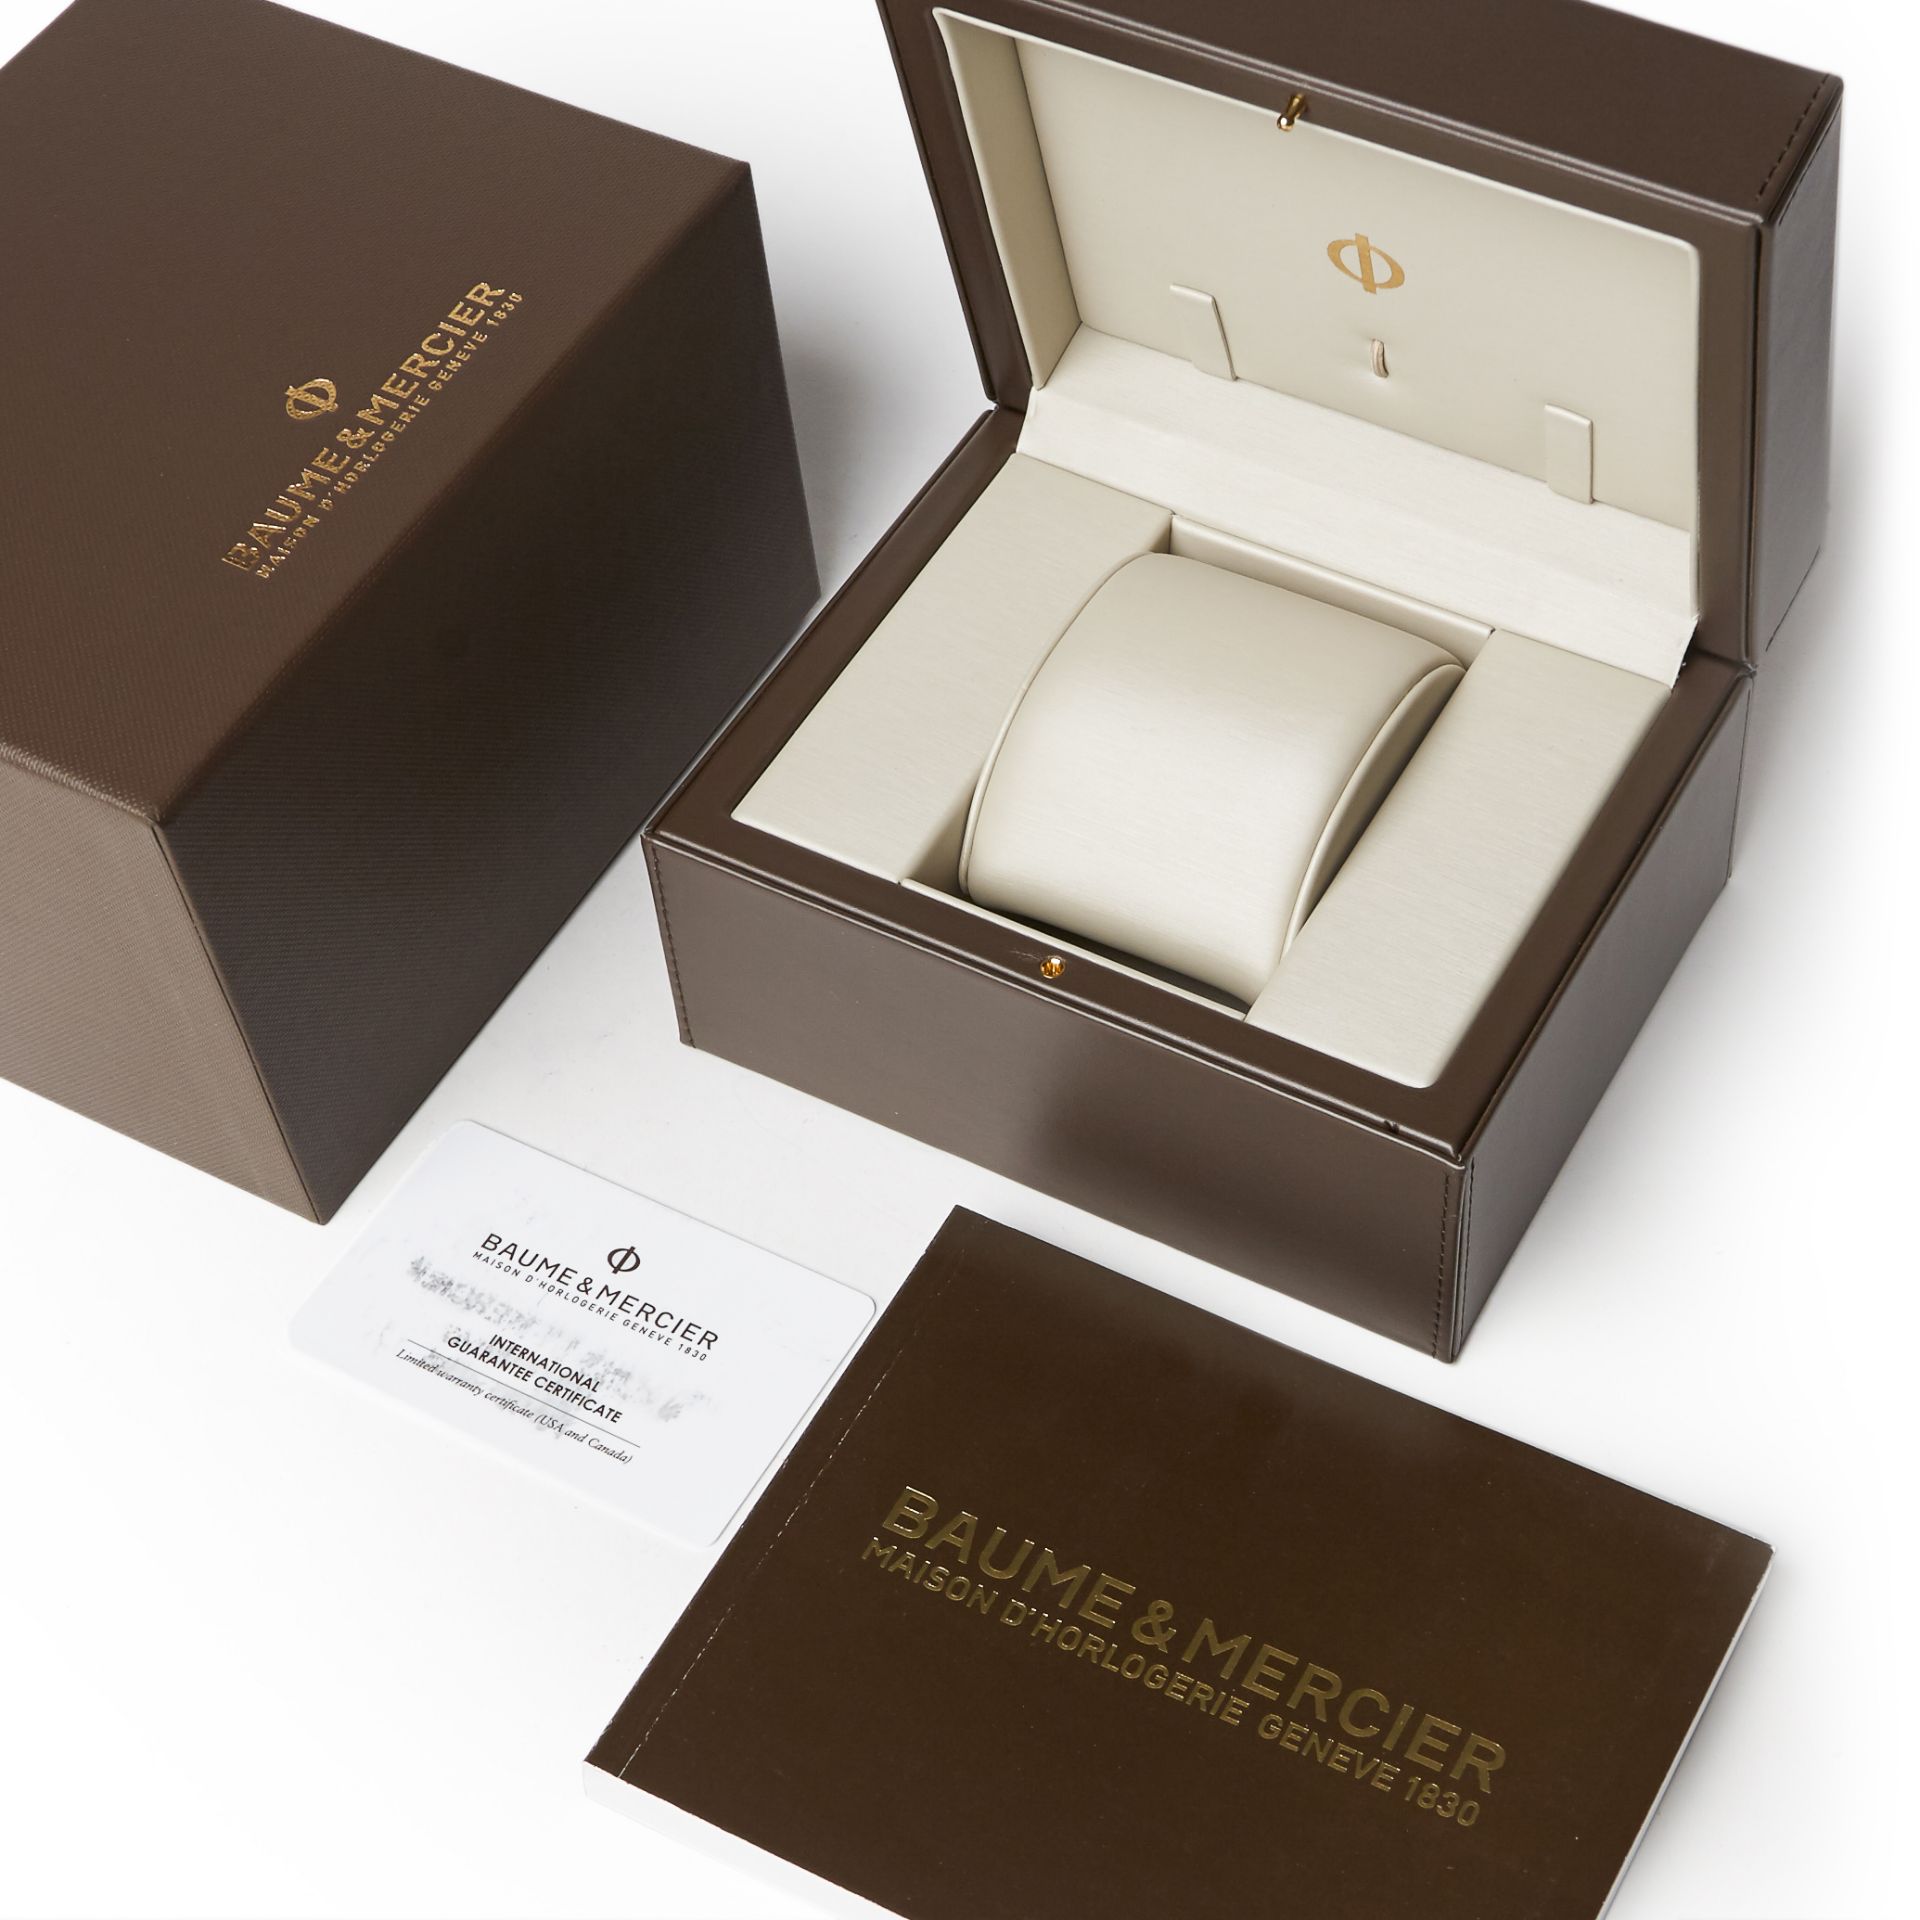 Baume & Mercier Classima Dual Time 40mm Stainless Steel - M0A10273 - Image 9 of 9